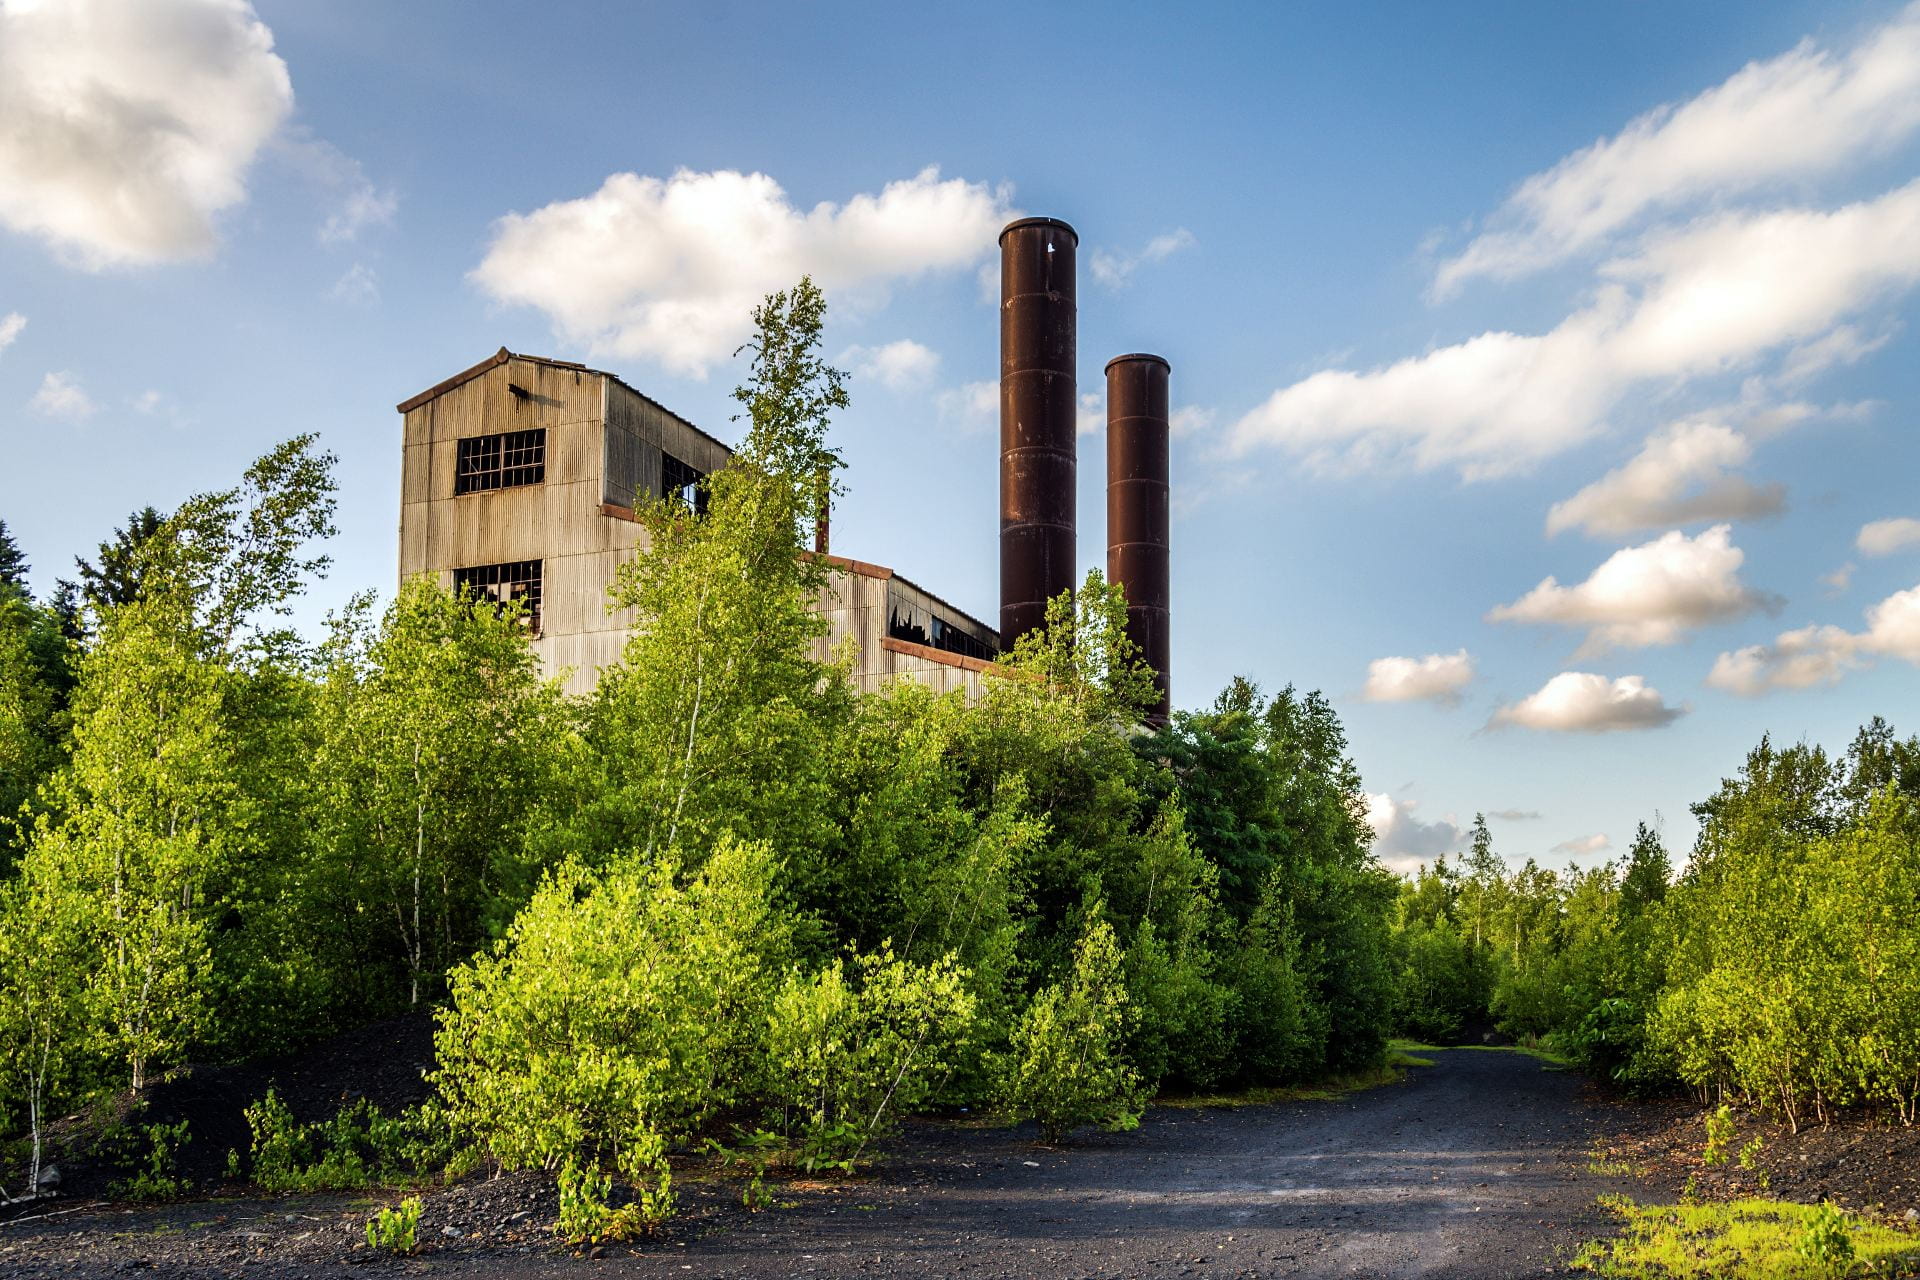 Abandoned coal processing plant, overgrown and unused. Shenandoah, Pennsylvania. Credit: Bill Dickinson, Flickr, Licensed under CC BY-NC-ND 2.0